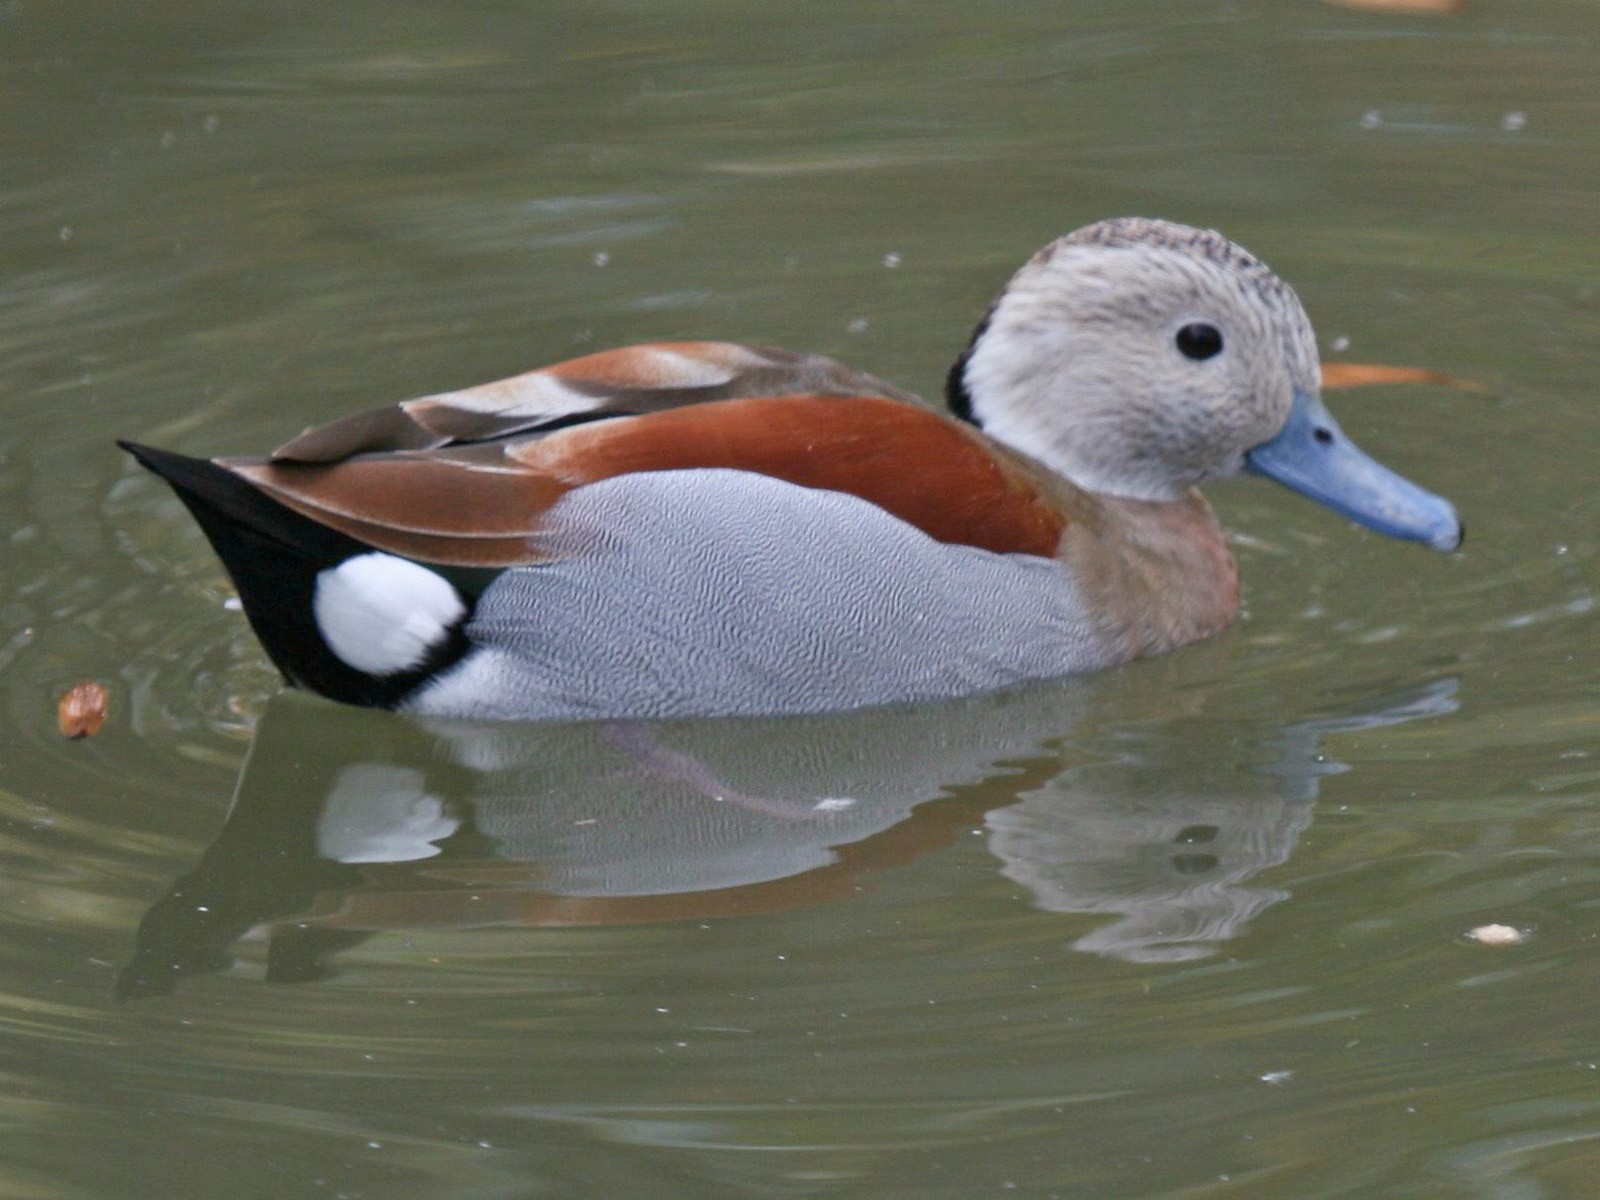 ringed teal, scientific name Callonetta leucophrys